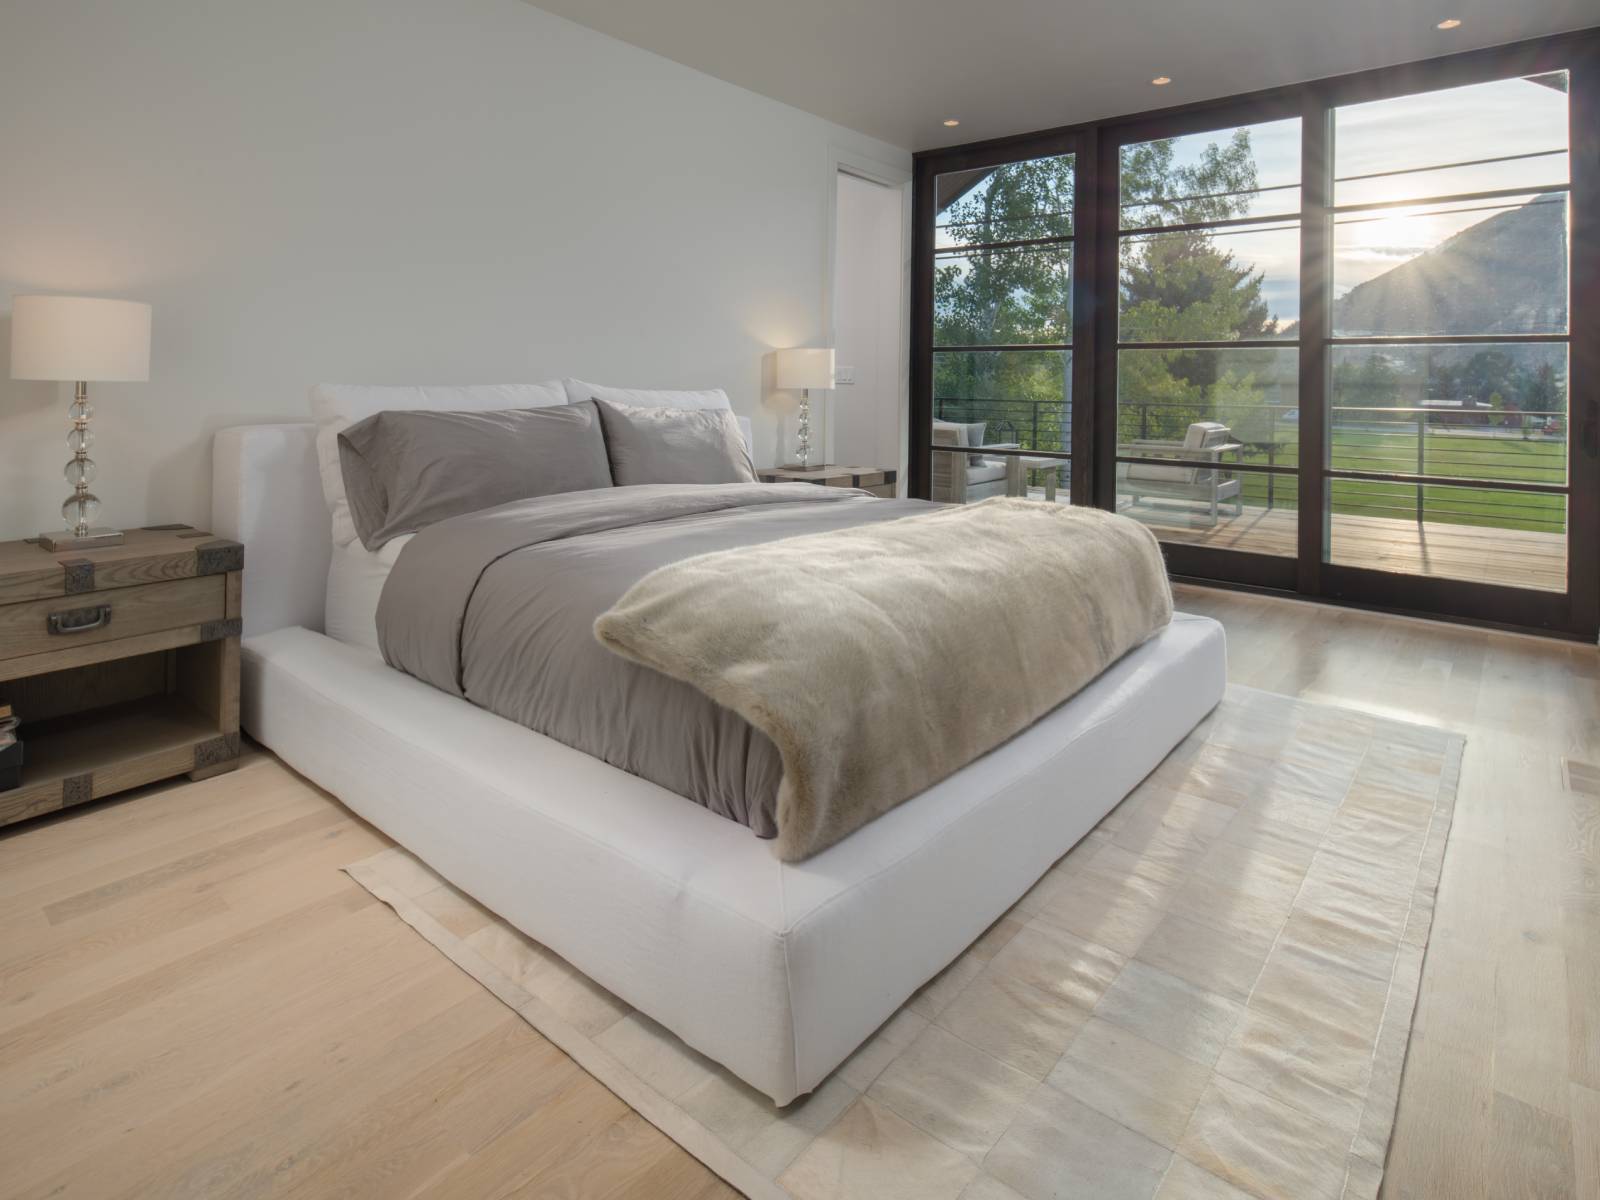 Interior view of the main bedroom at Gill 3+4, a custom home designed and built by Farmer Payne Architects.